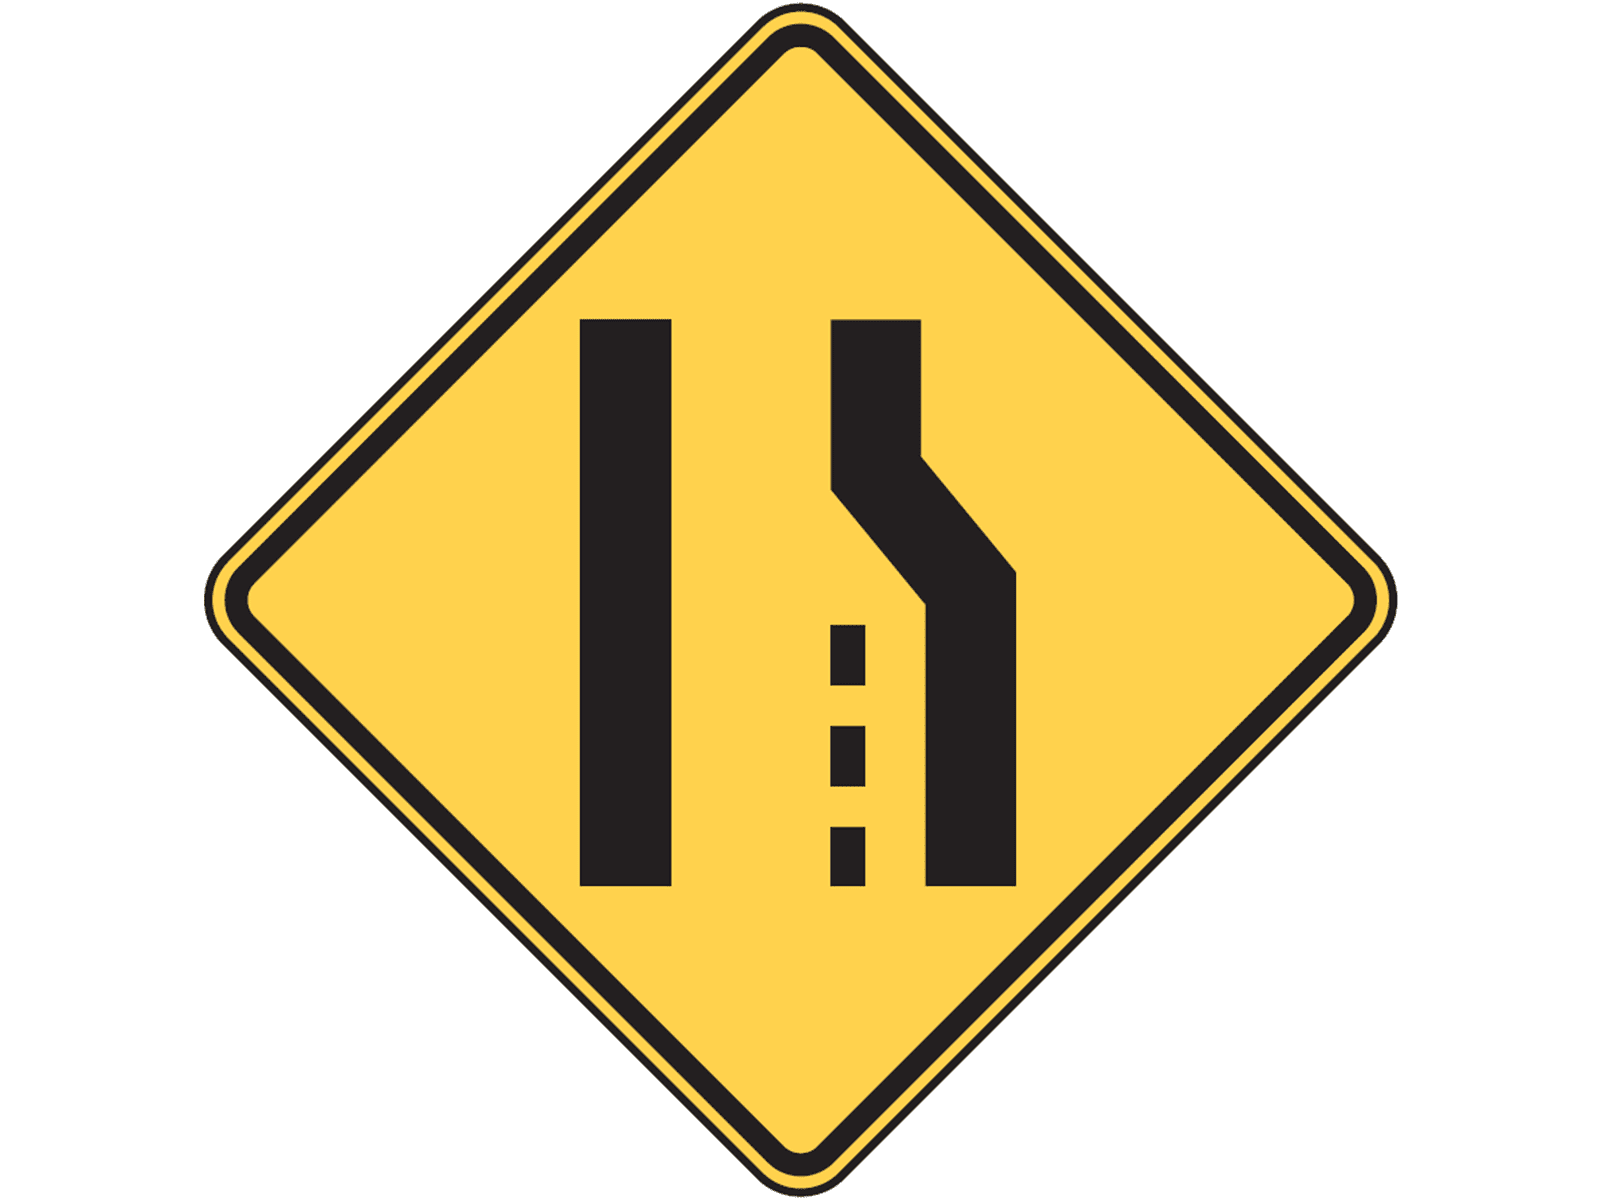 Lane Reduction W4-2 - W4: Lanes and Merges